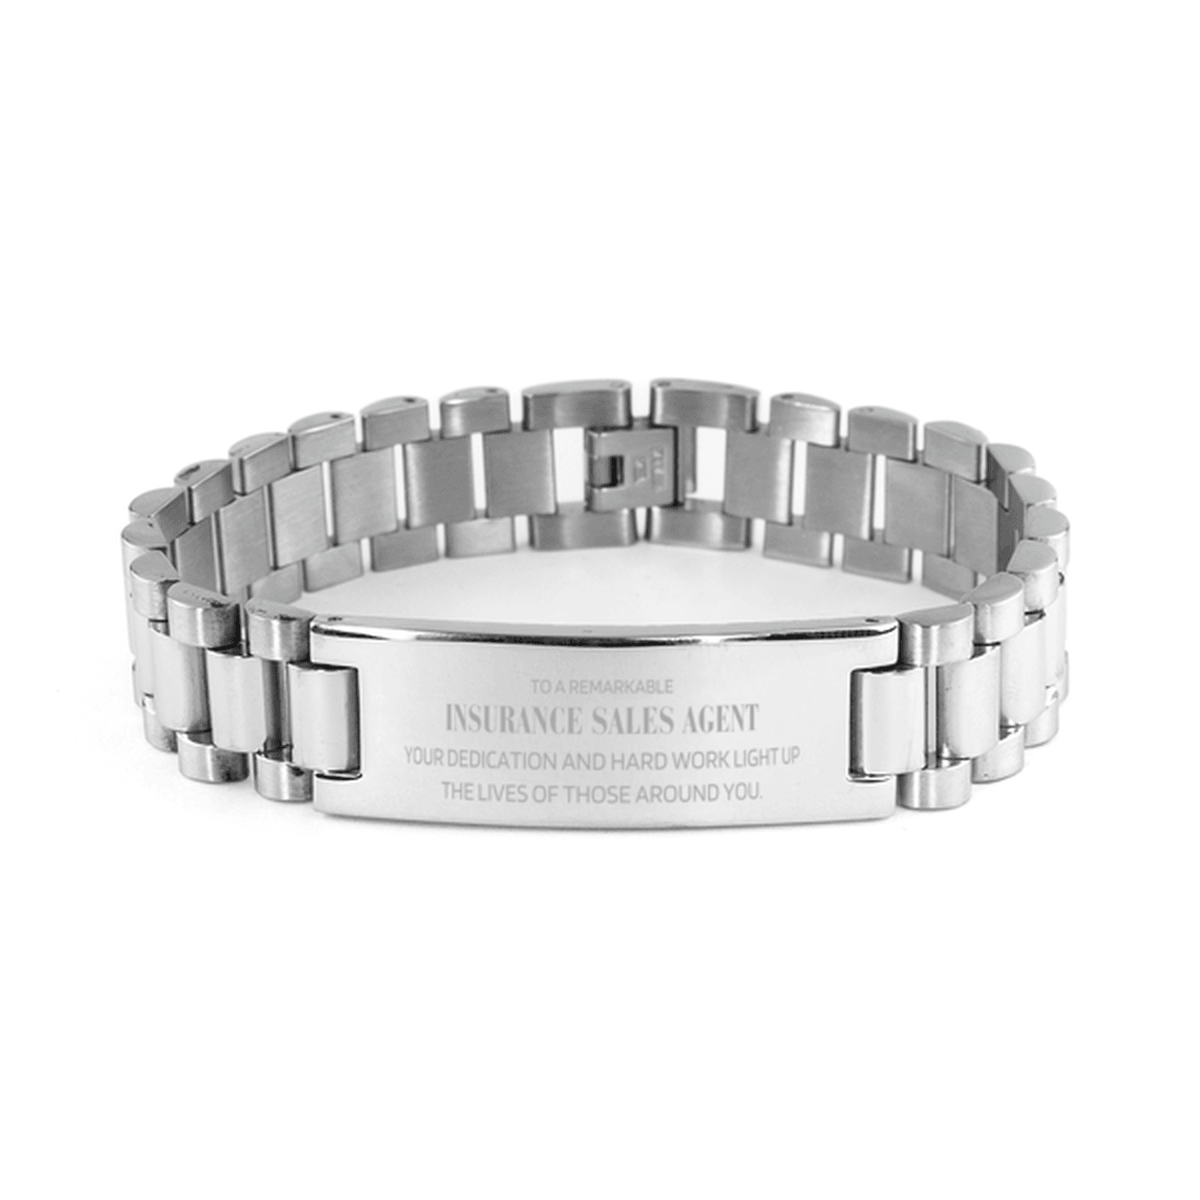 Remarkable Insurance Sales Agent Gifts, Your dedication and hard work, Inspirational Birthday Christmas Unique Ladder Stainless Steel Bracelet For Insurance Sales Agent, Coworkers, Men, Women, Friends - Mallard Moon Gift Shop